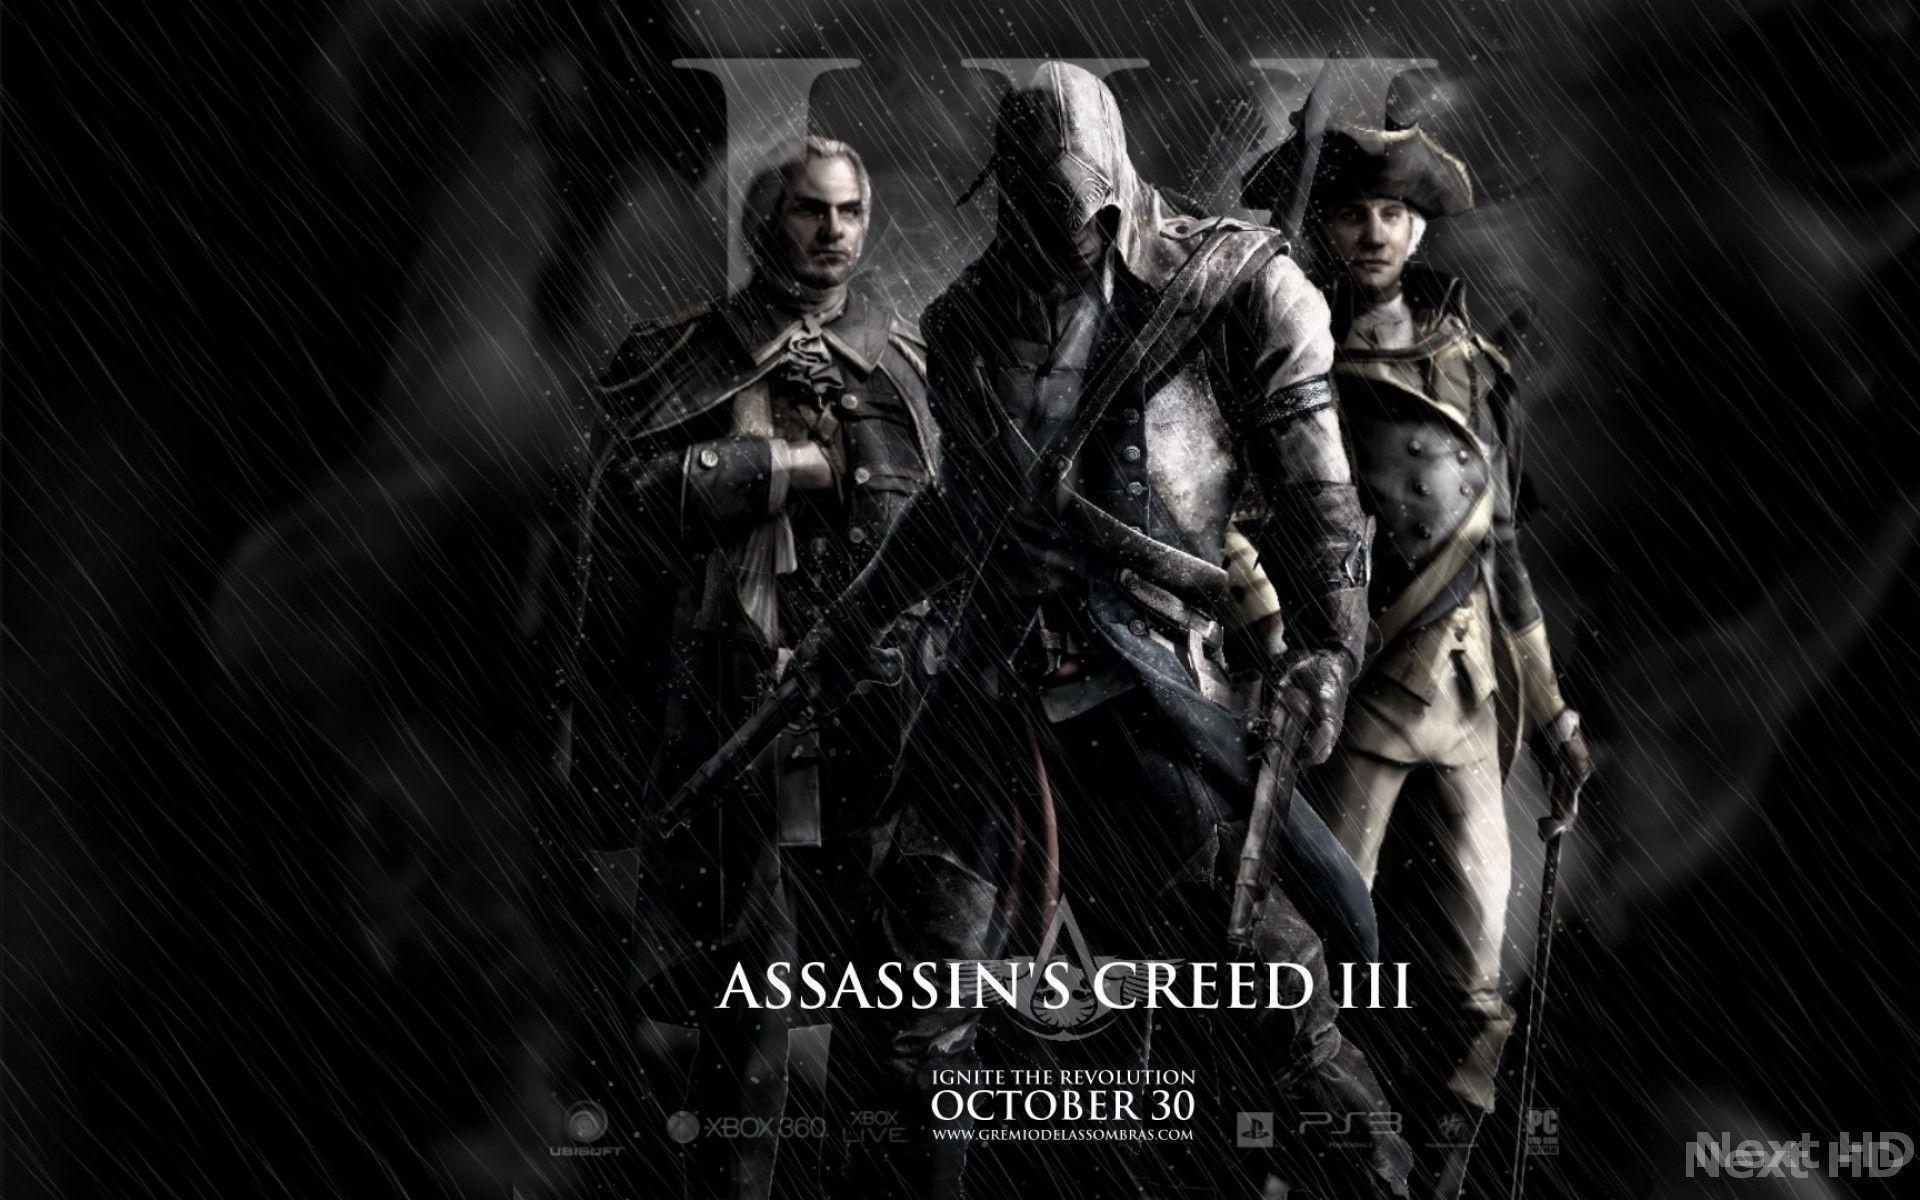 Download Assassin&Creed 3 Wallpapers Download